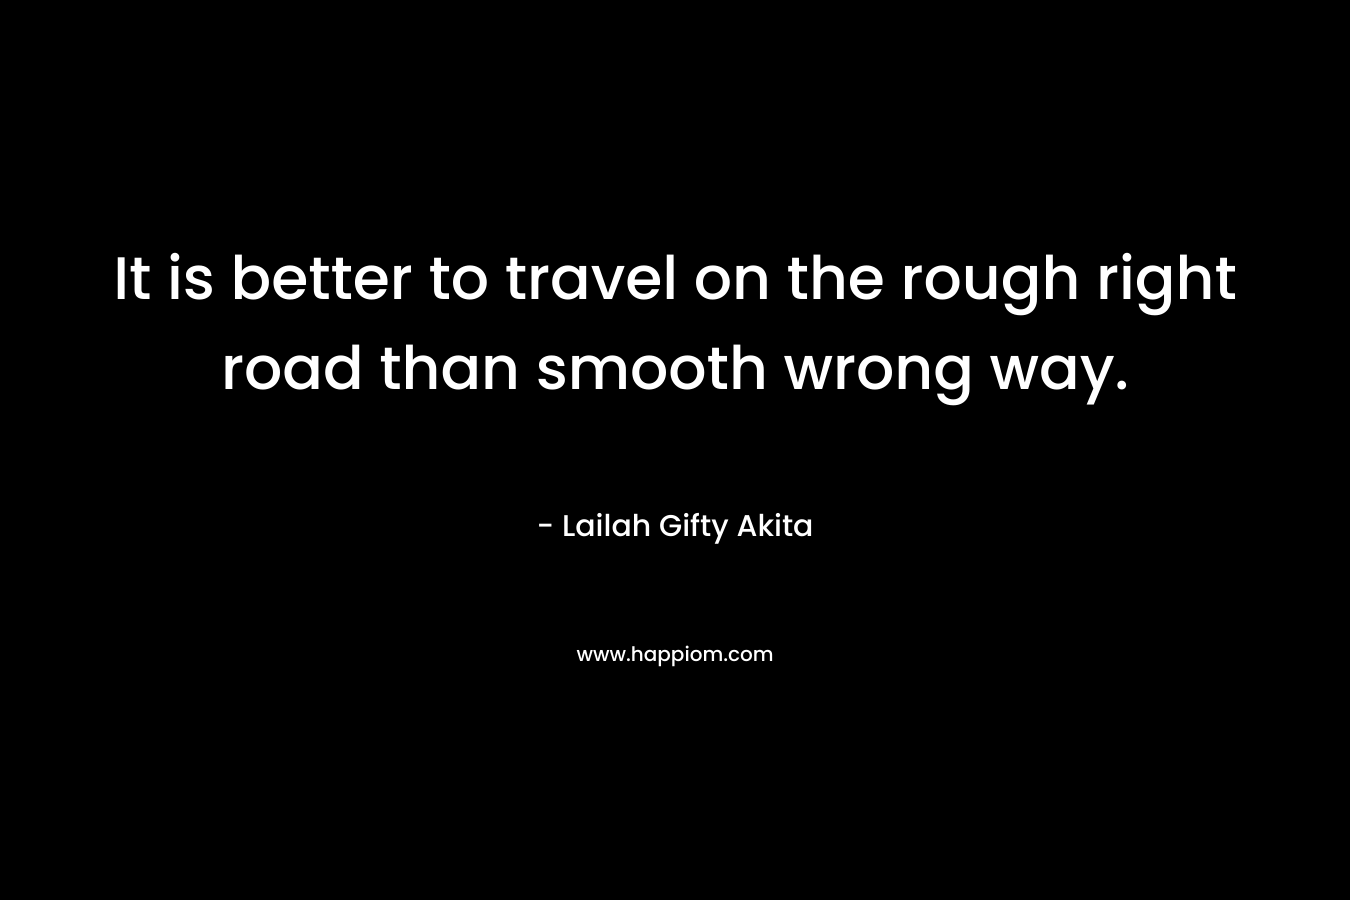 It is better to travel on the rough right road than smooth wrong way.